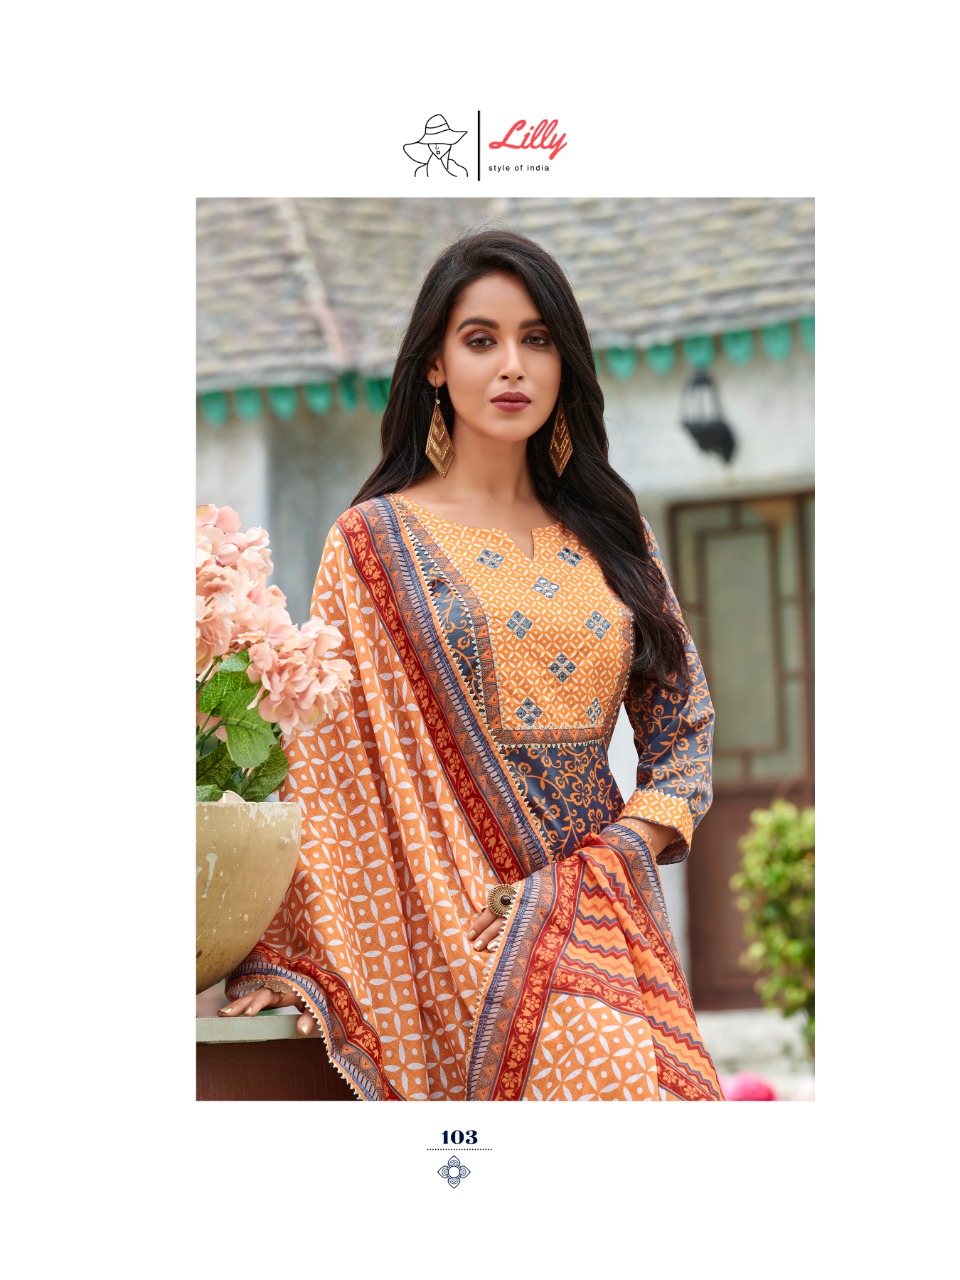 lilly style of india Basant nx linen cotton new and modern style top pent with dupatta catalog